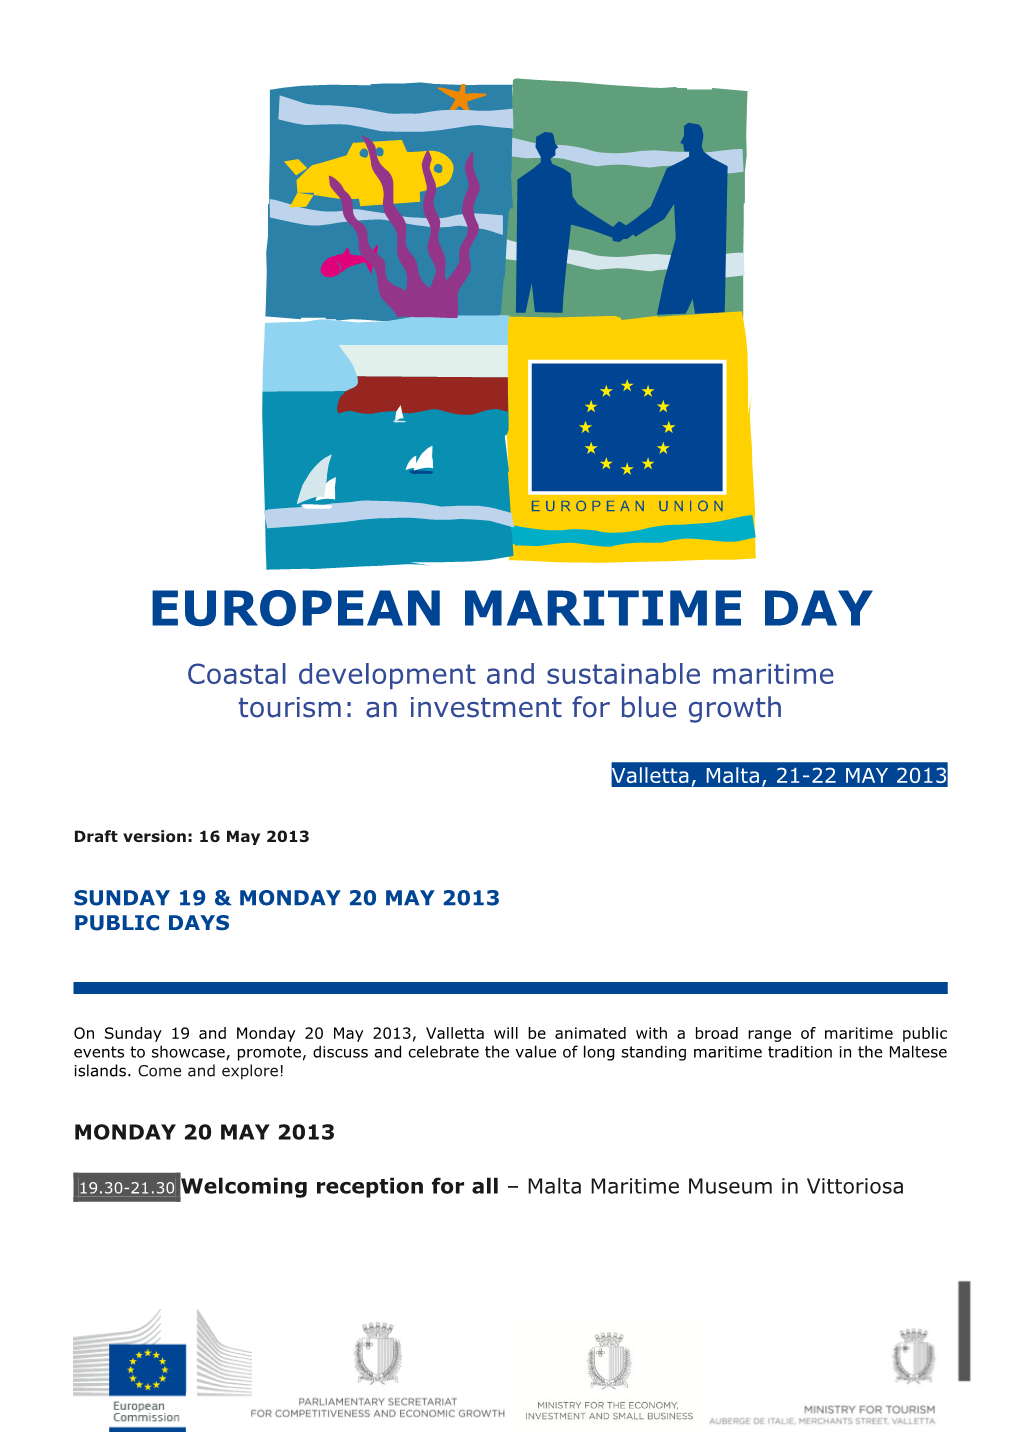 EUROPEAN MARITIME DAY Coastal Development and Sustainable Maritime Tourism: an Investment for Blue Growth